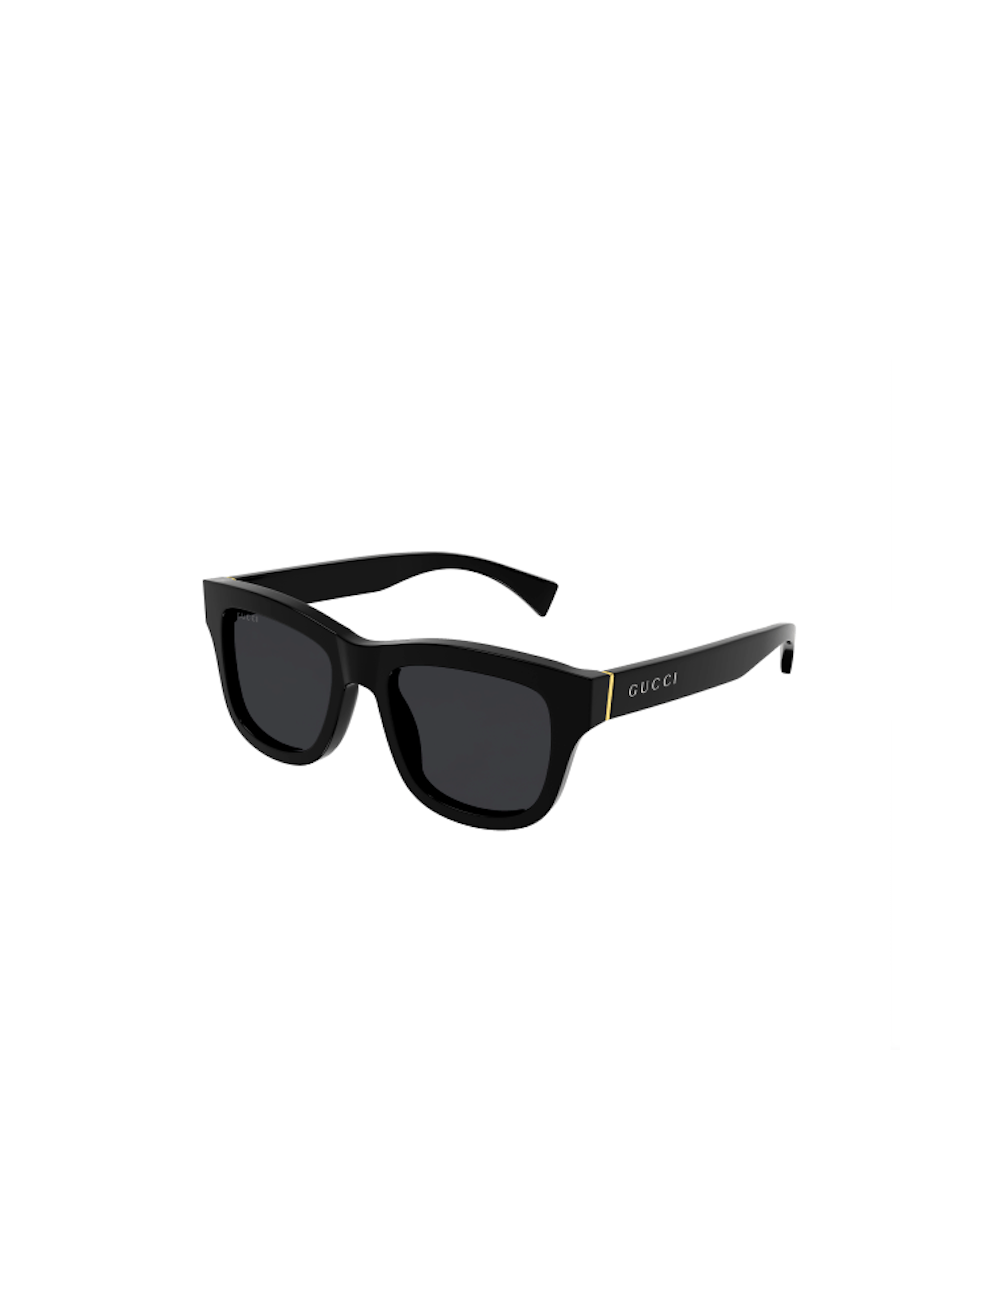 Round Black Gucci Shades at best price in Rangareddy | ID: 22813805373